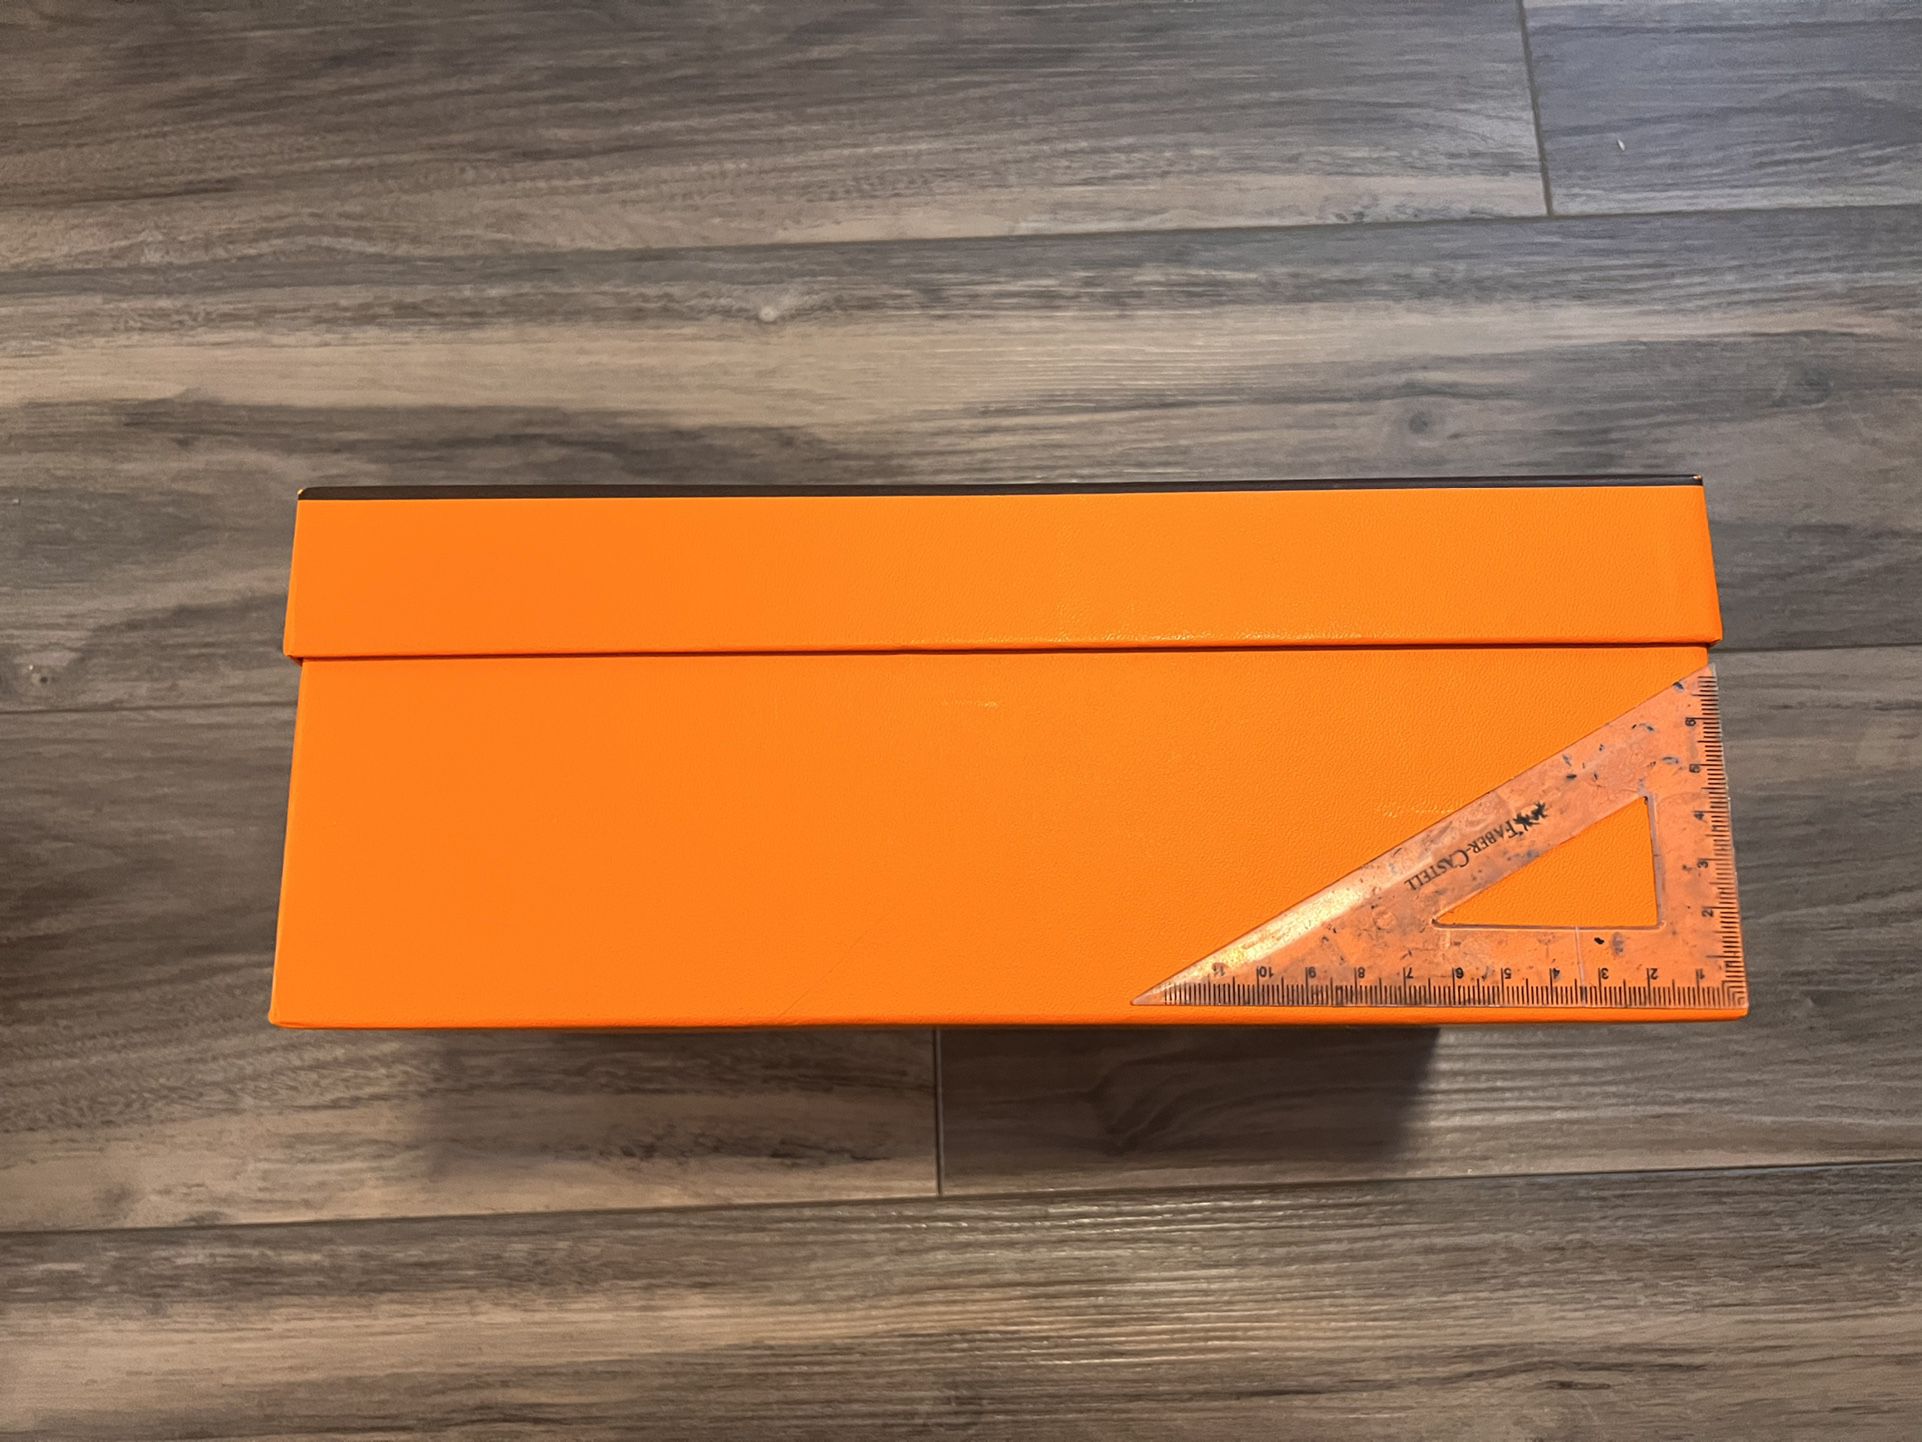 Small Hermes Box for Sale in Los Angeles, CA - OfferUp